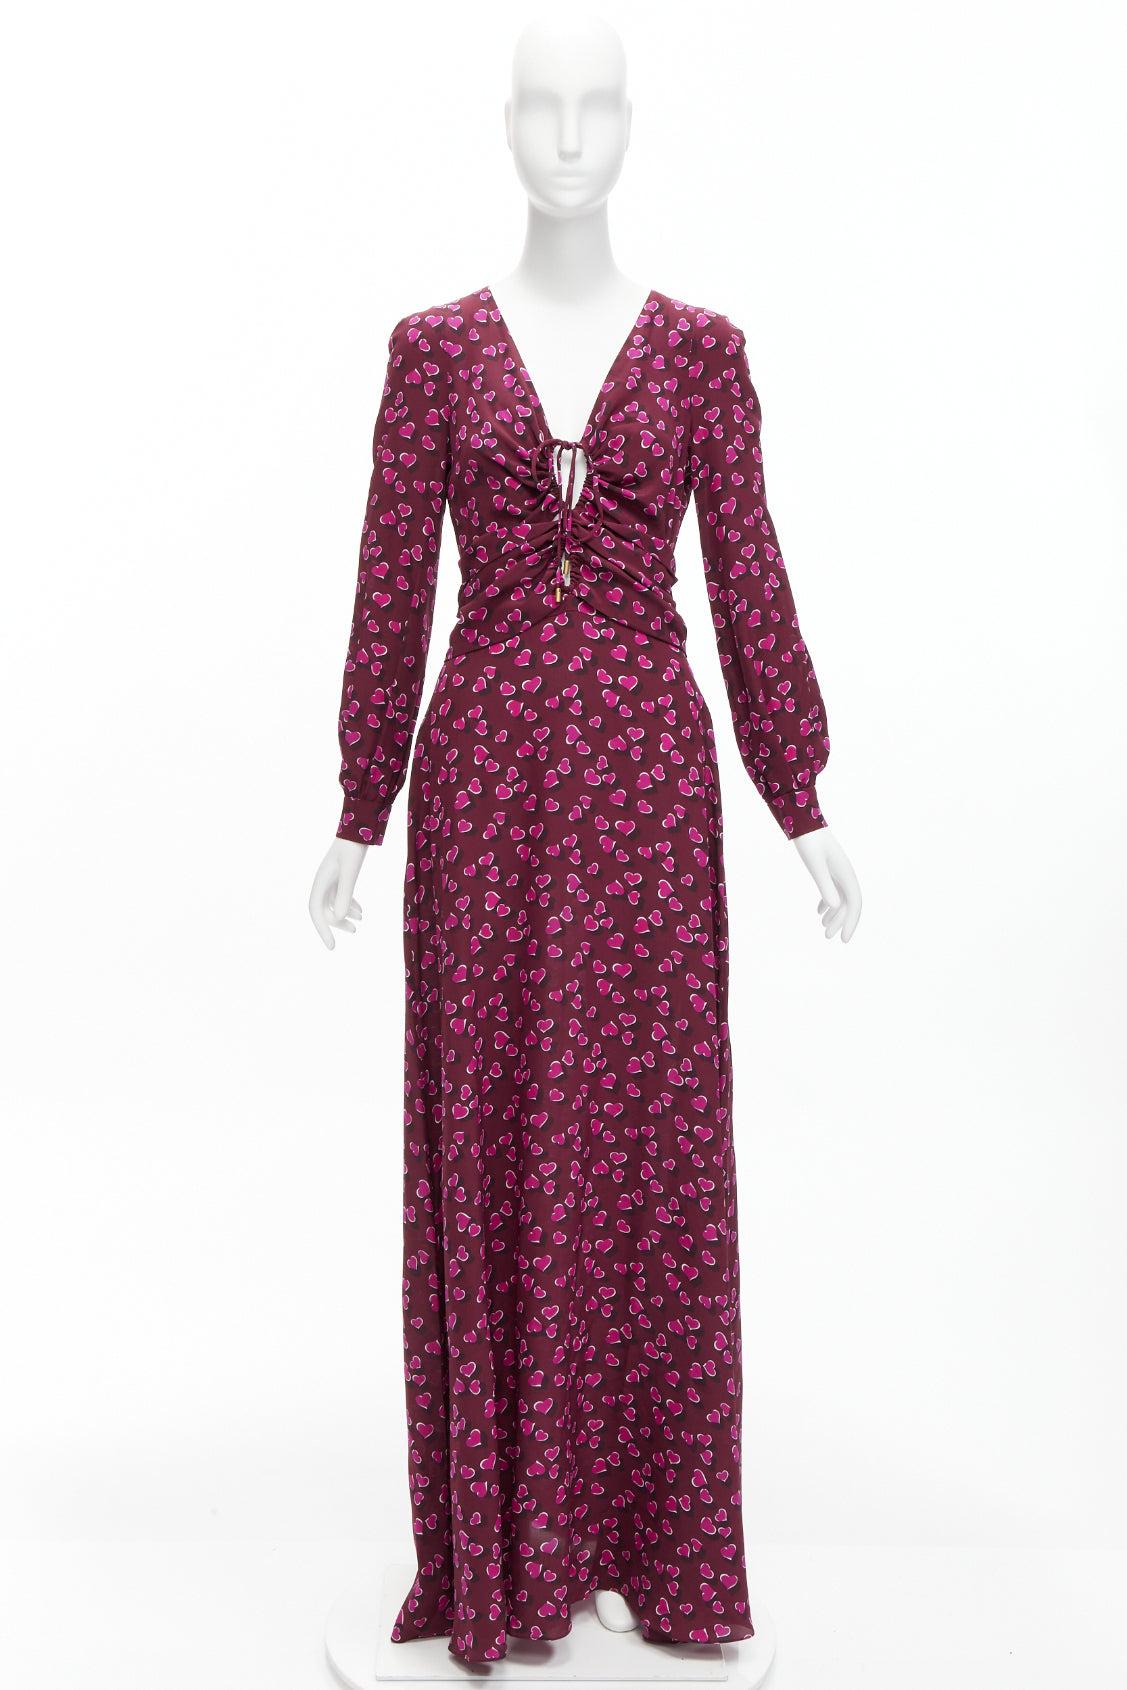 GUCCI 2014 Runway Heart On My Sleeve 100% silk plunge neck gown dress IT38 XS 5